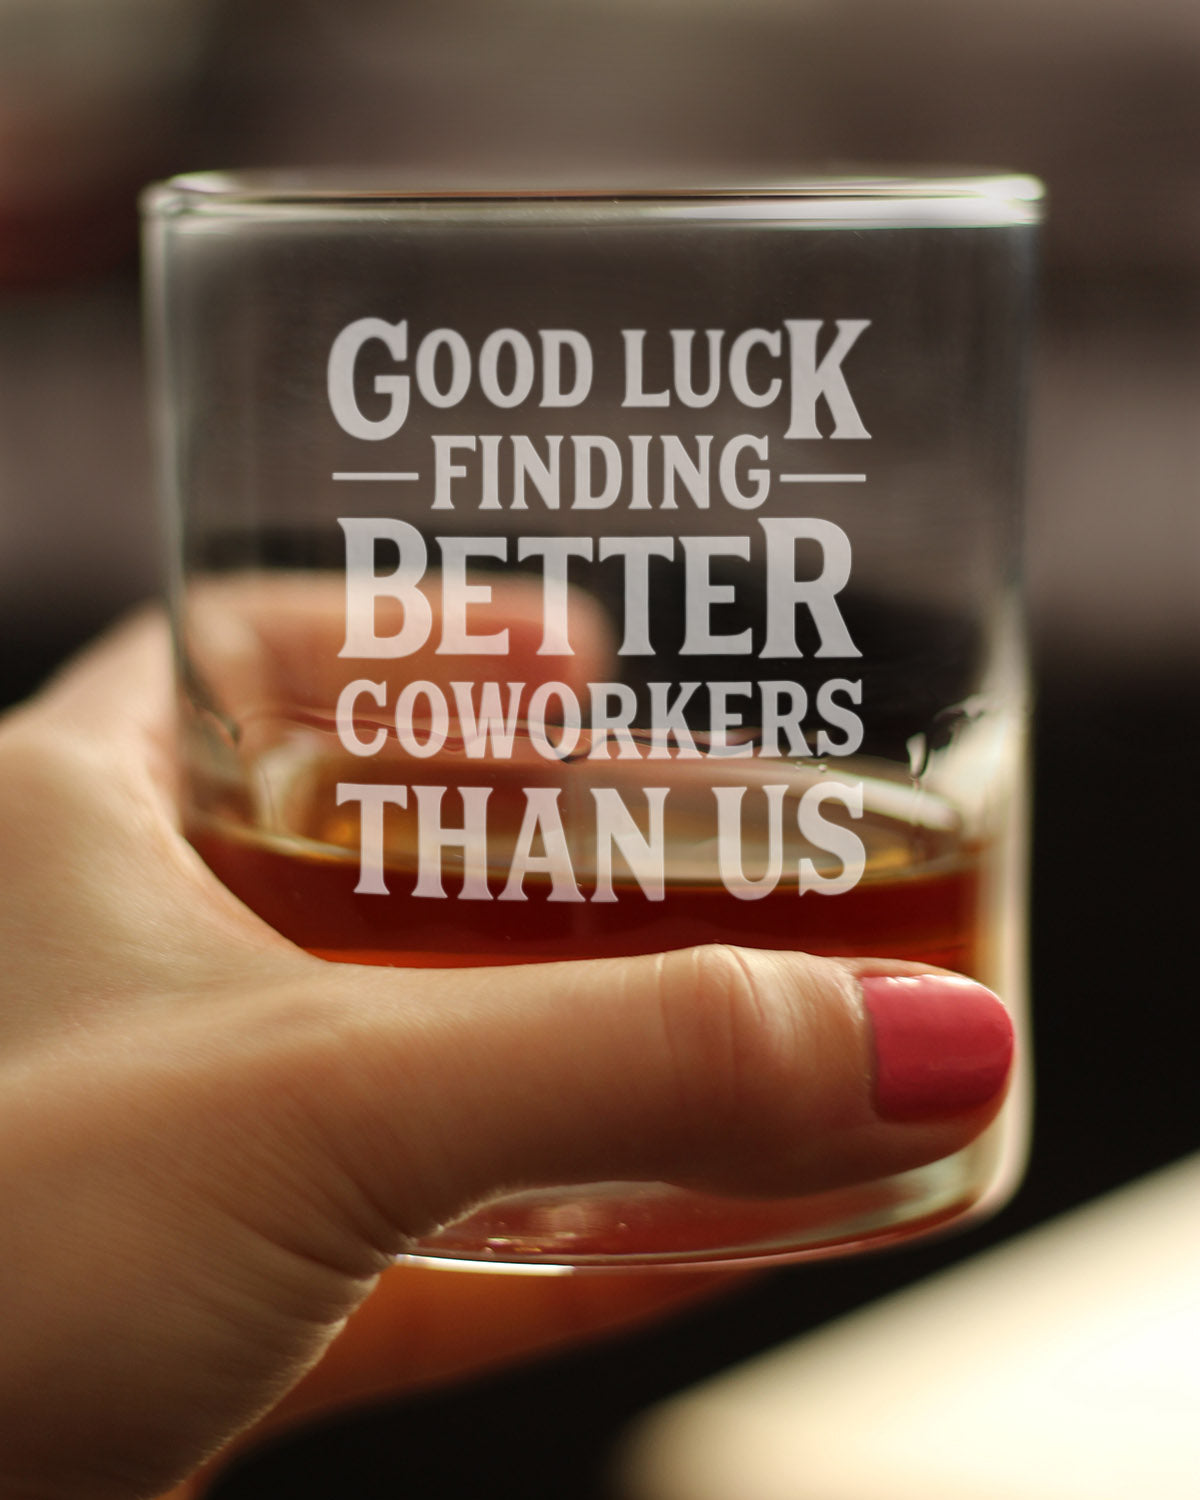 Good Luck Finding Better Coworkers Than Us - Funny Whiskey Rocks Glass Gifts for Coworker Leaving - Fun Unique Office Gifts